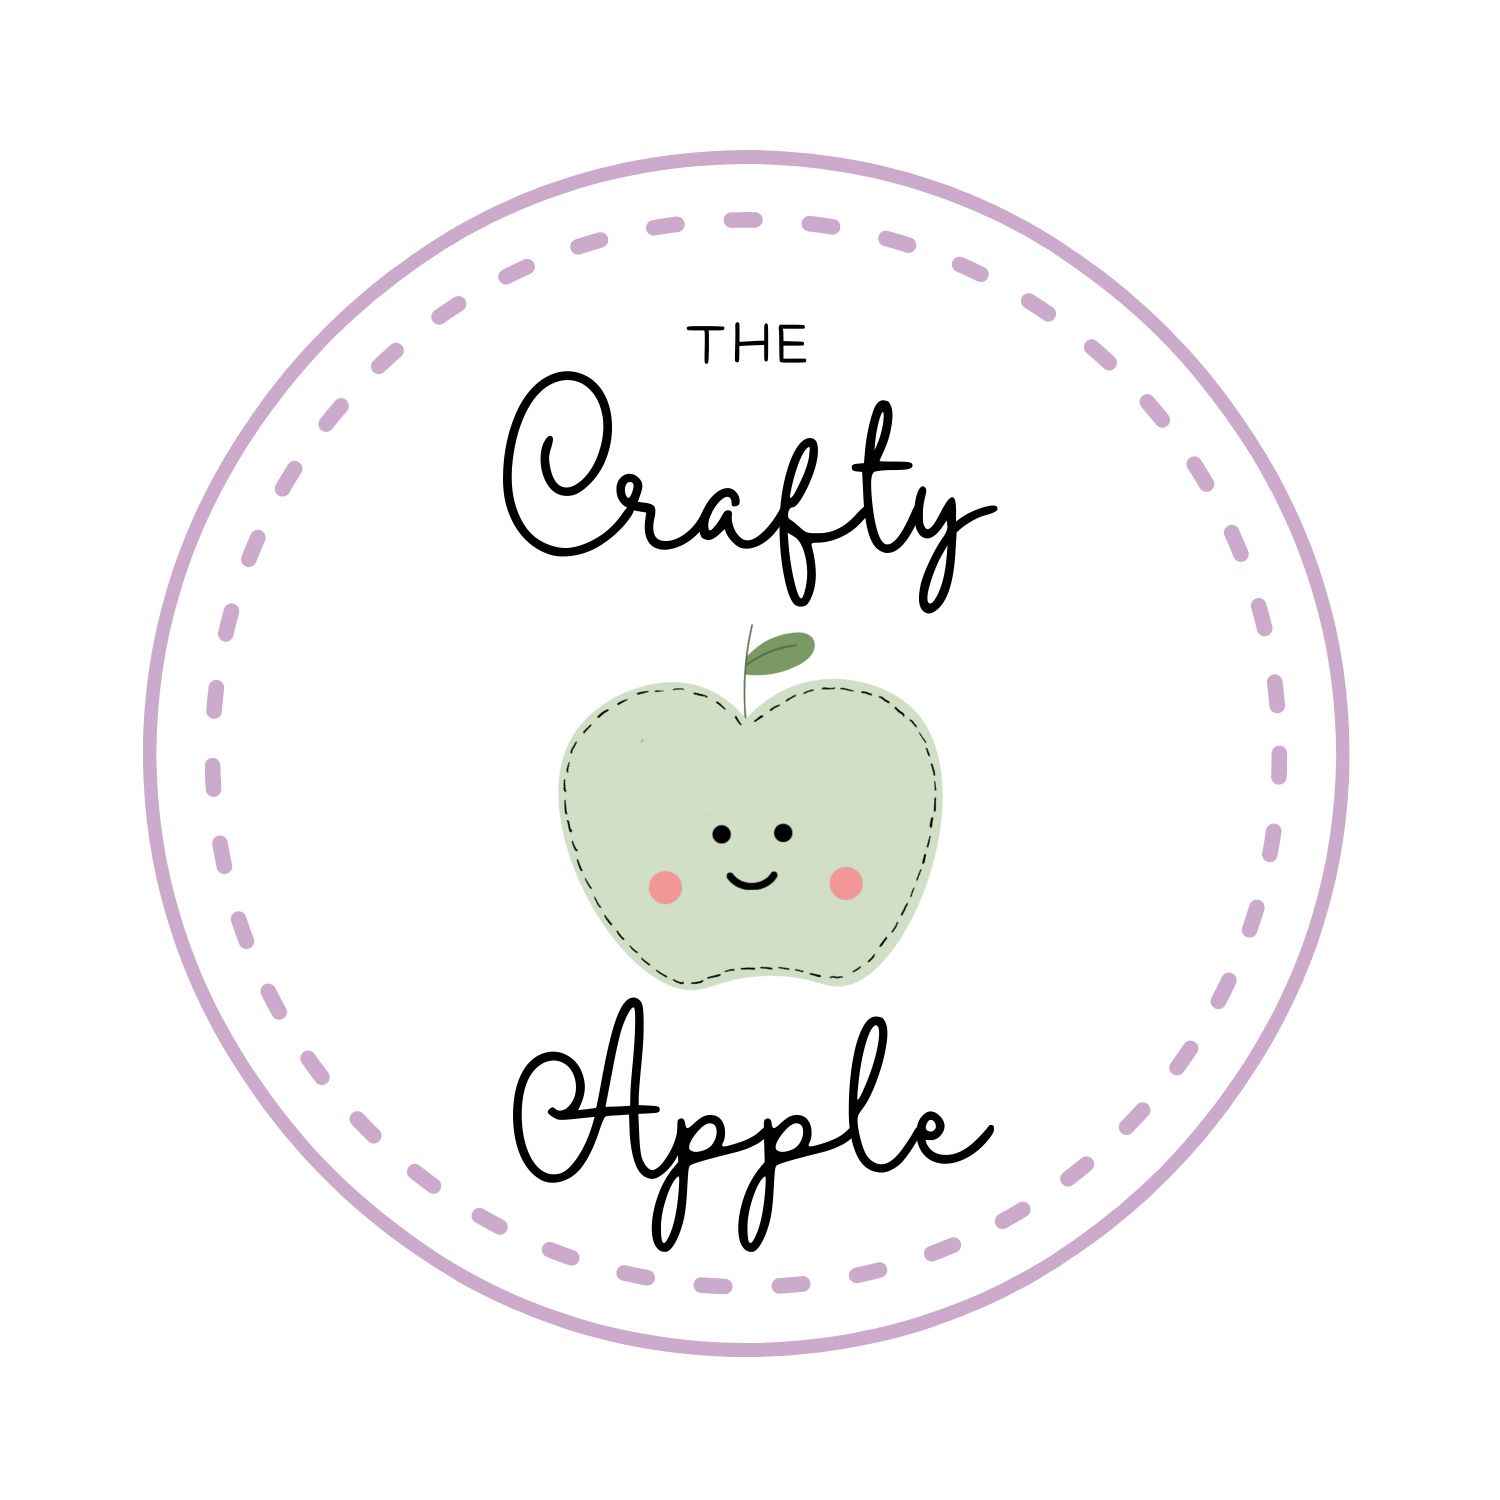 This shop is called TheCraftyApple 